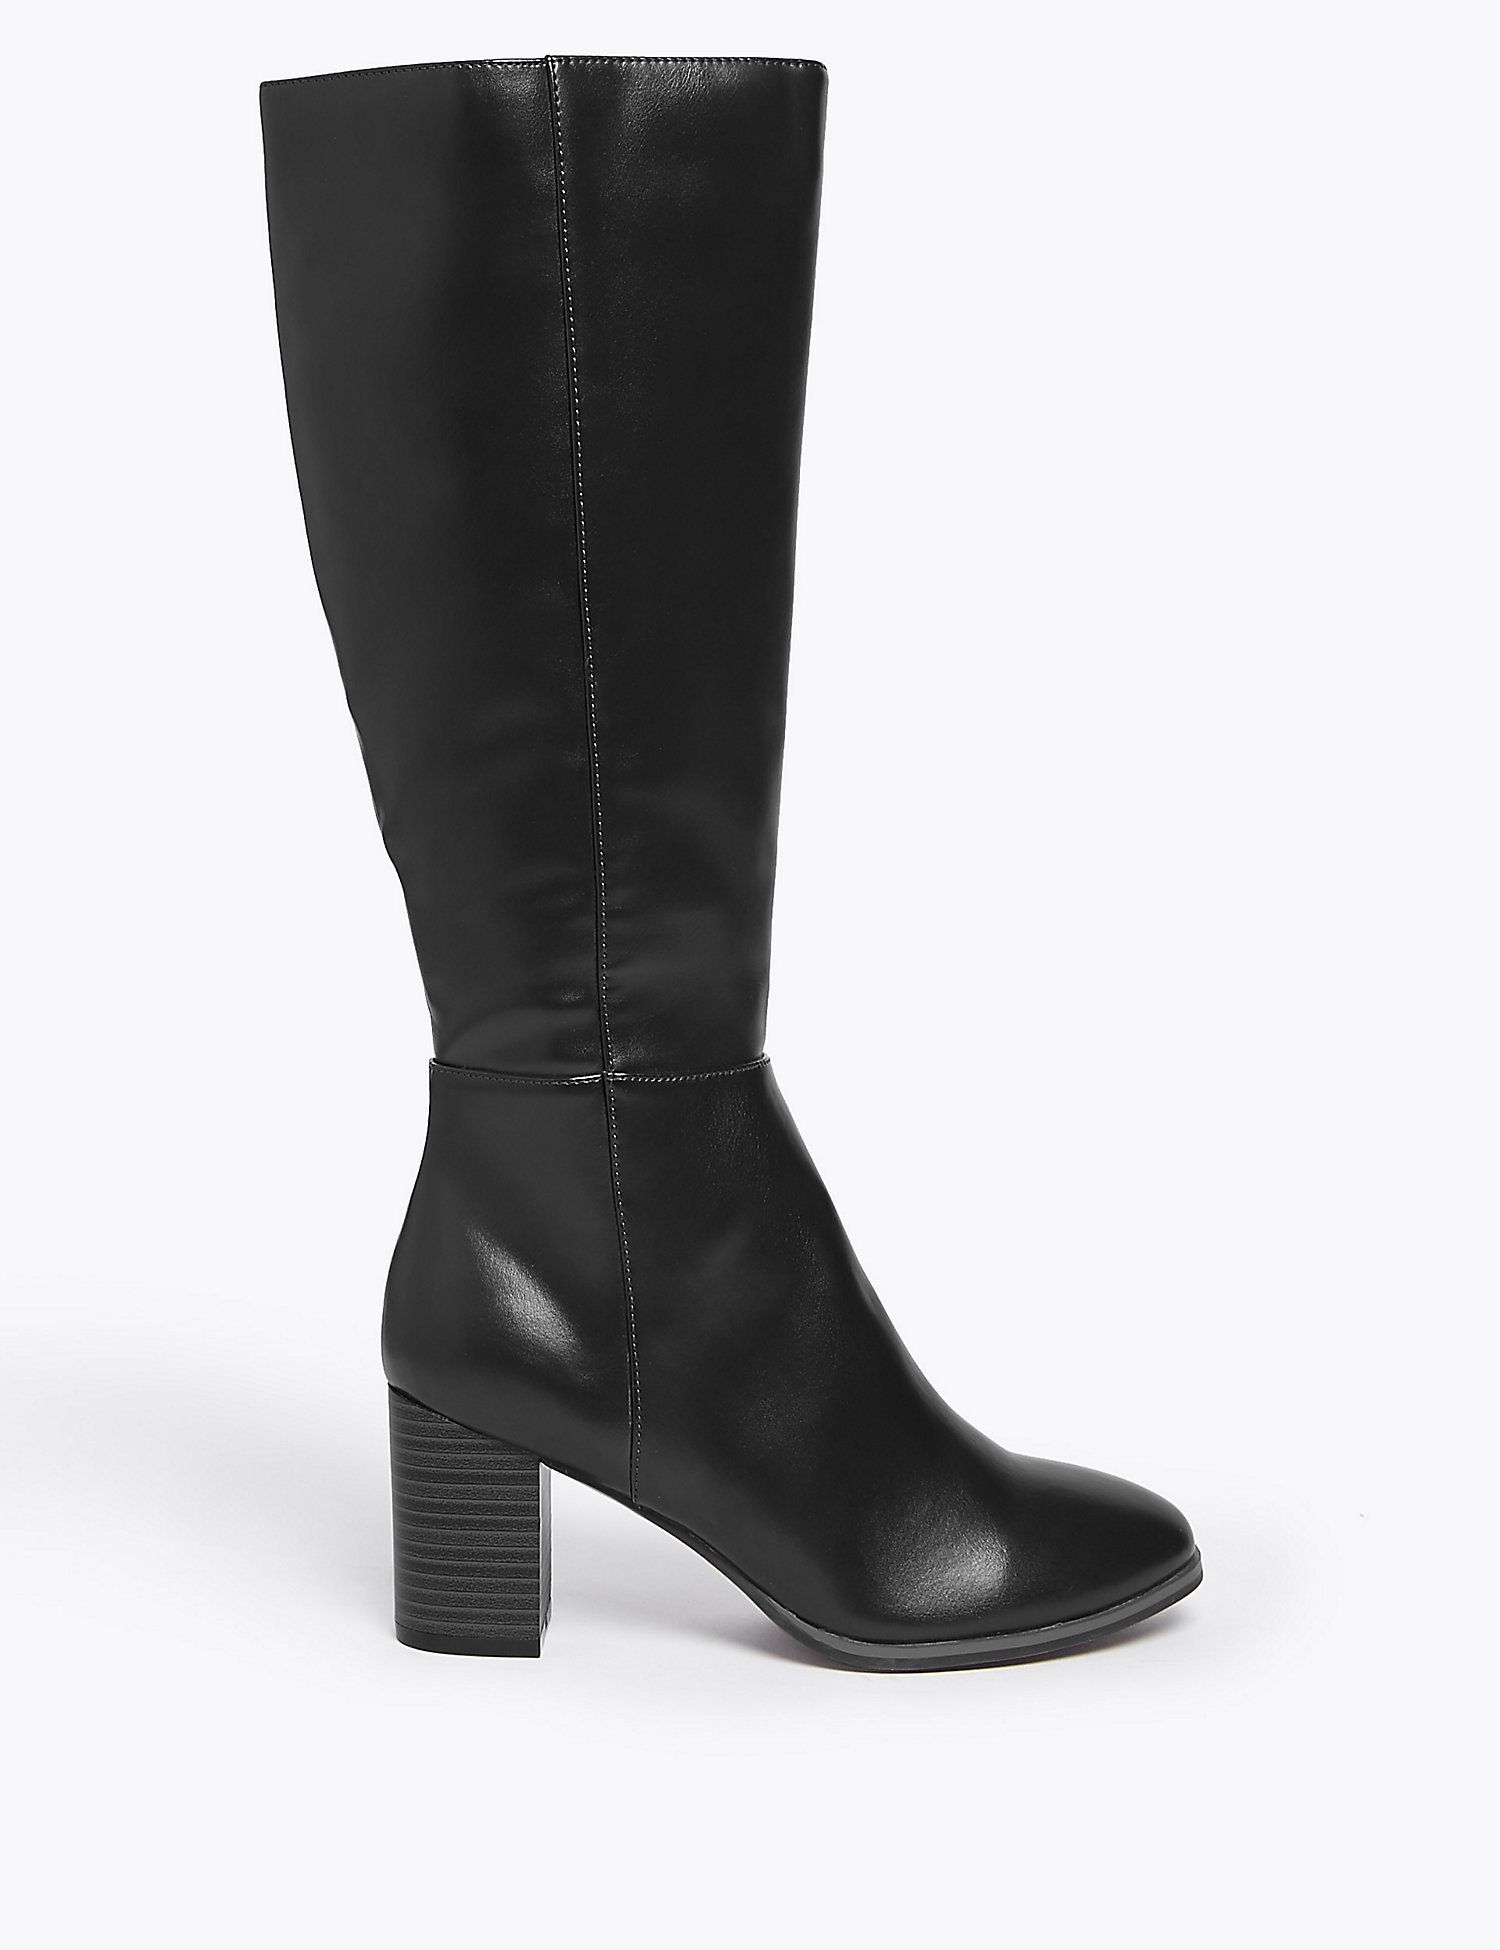 m & s womens boots